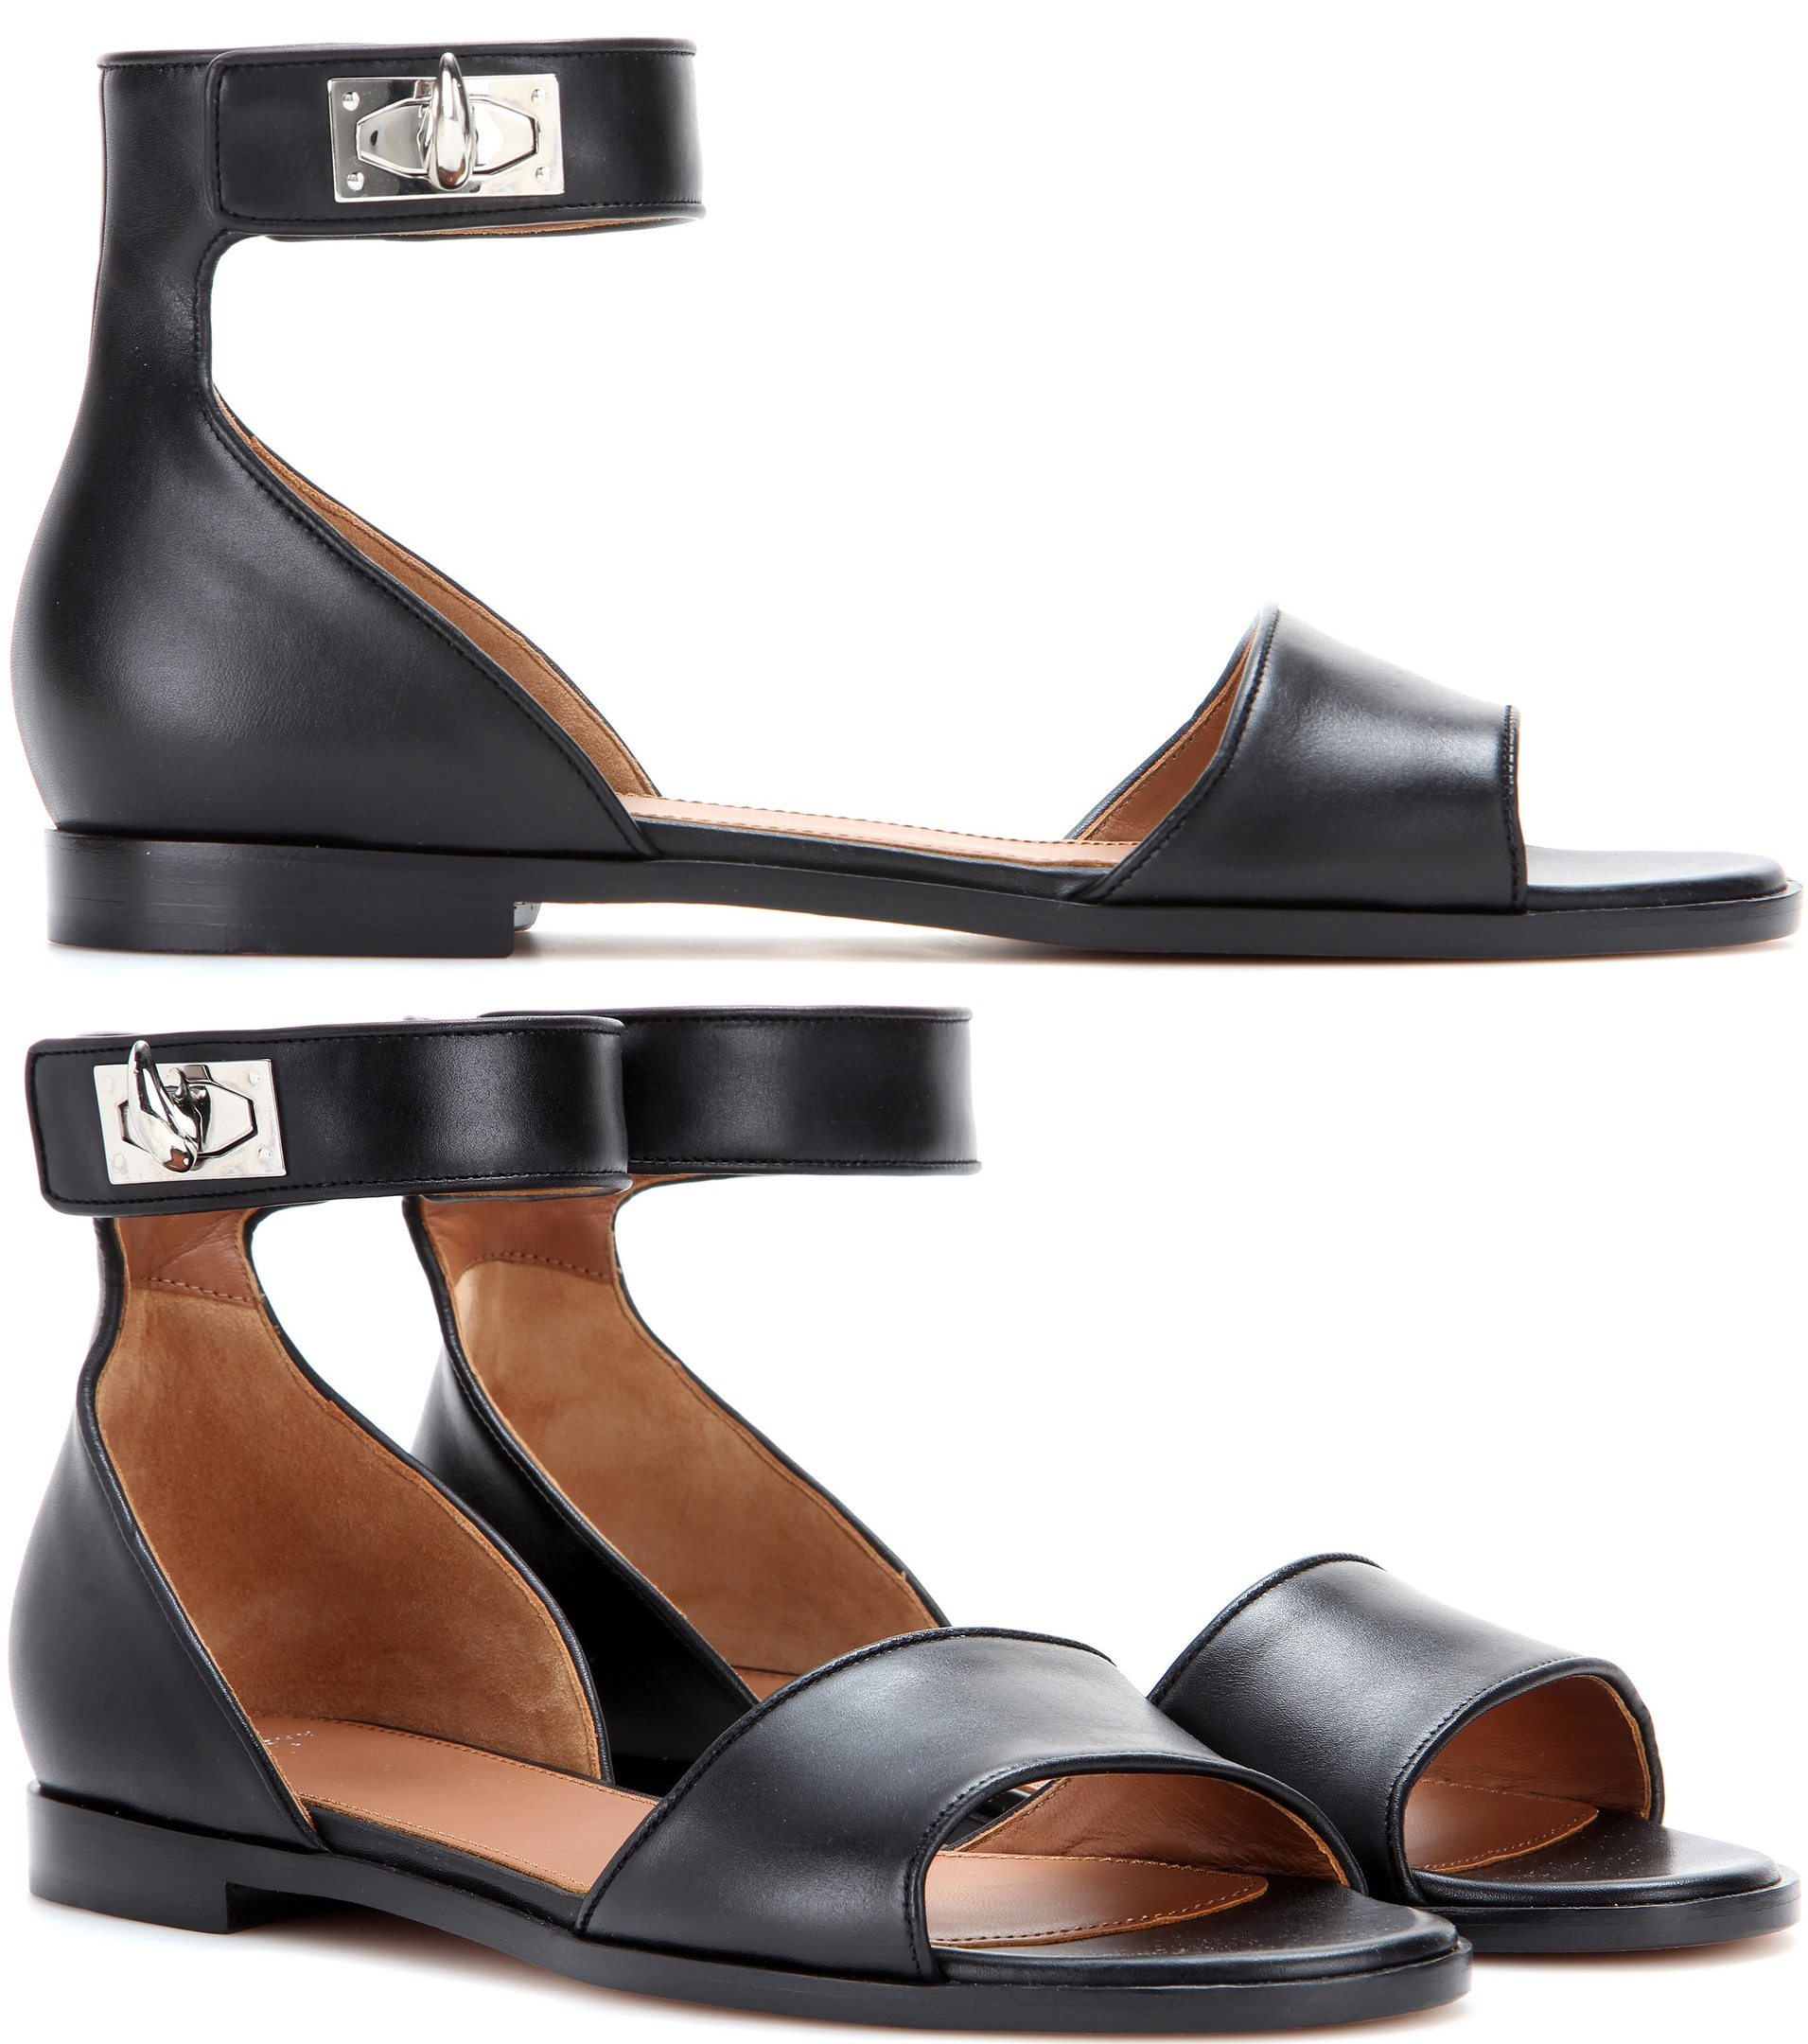 Givenchy black leather sandals